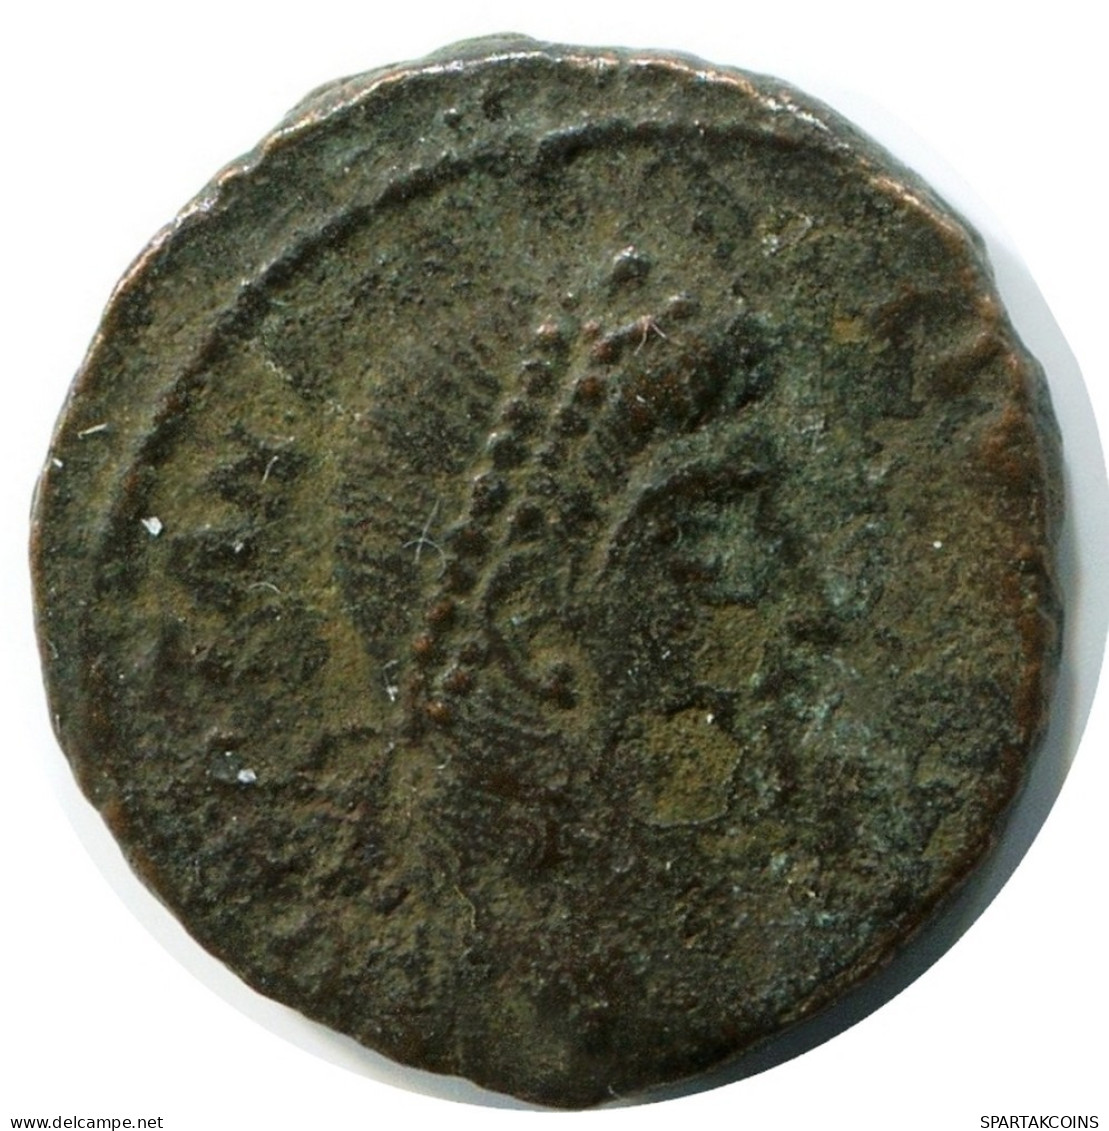 ROMAN Moneda MINTED IN ANTIOCH FOUND IN IHNASYAH HOARD EGYPT #ANC11278.14.E.A - The Christian Empire (307 AD To 363 AD)